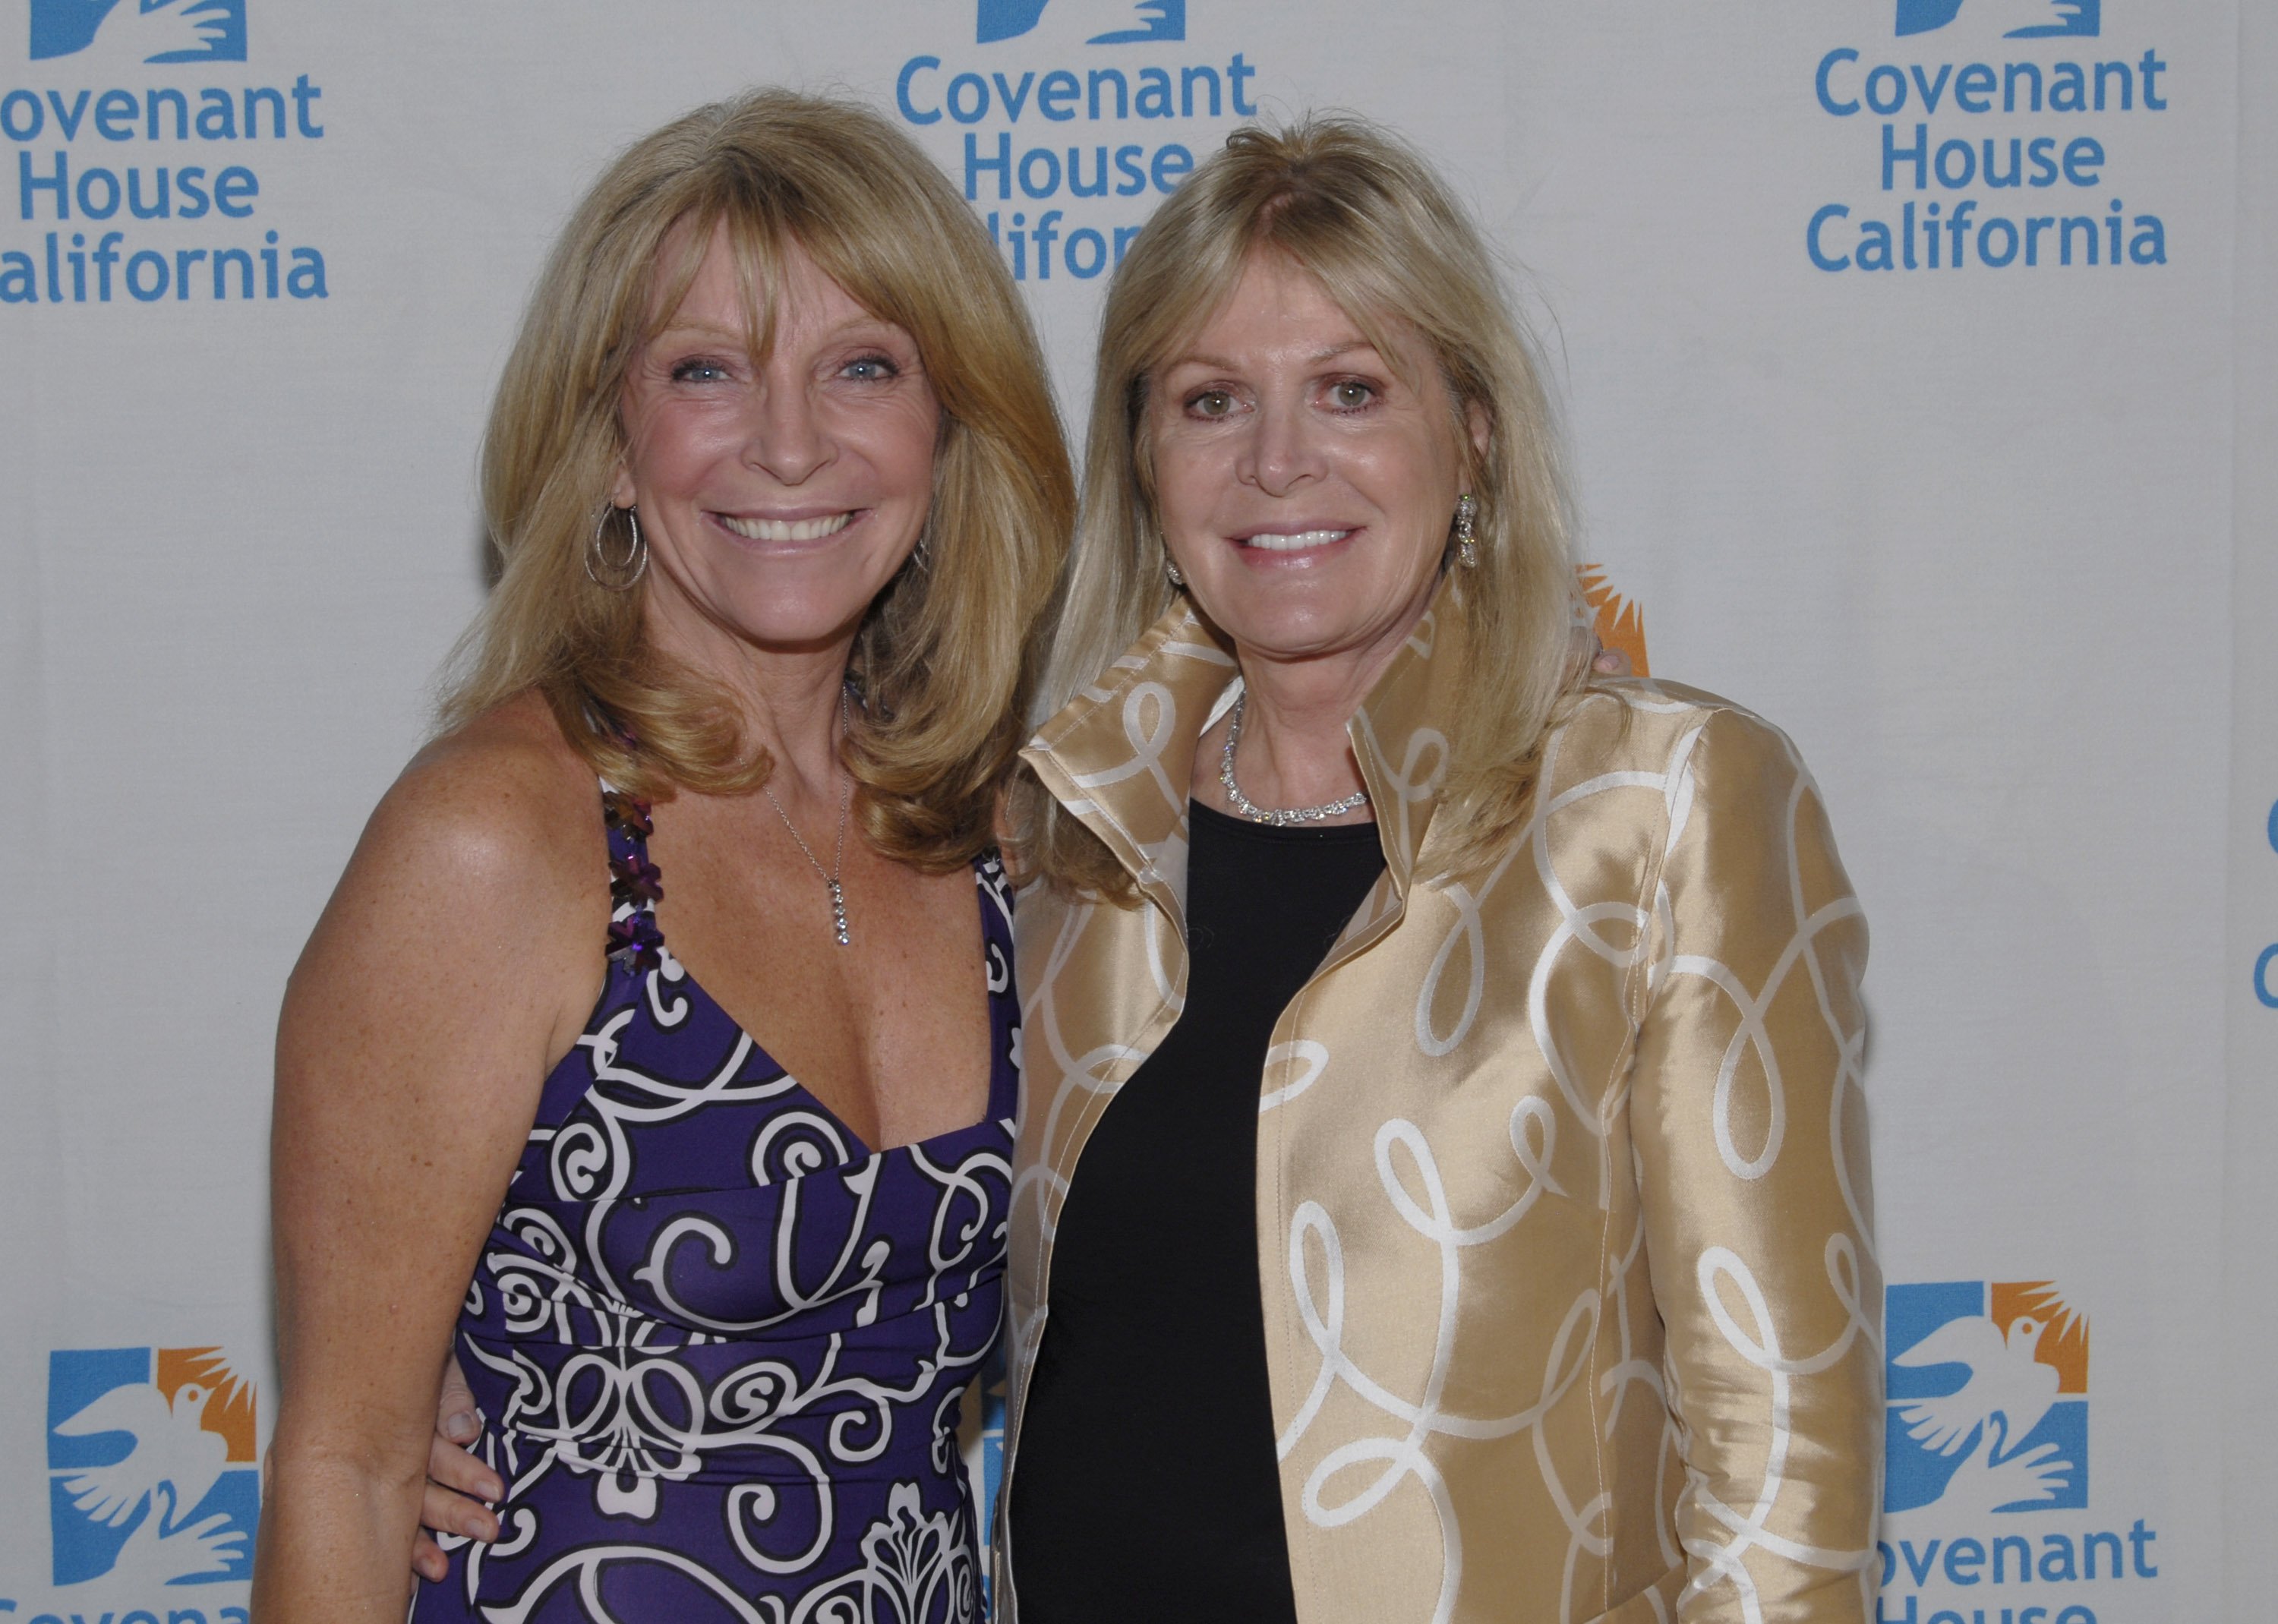 Elaine Trebek with Bonnie Lythgoe at the 10th Annual Covenant House California's Awards Gala - Inside at Beverly Hills Hotel in Beverly Hills, California | Photo: Beck Starr/Getty Images